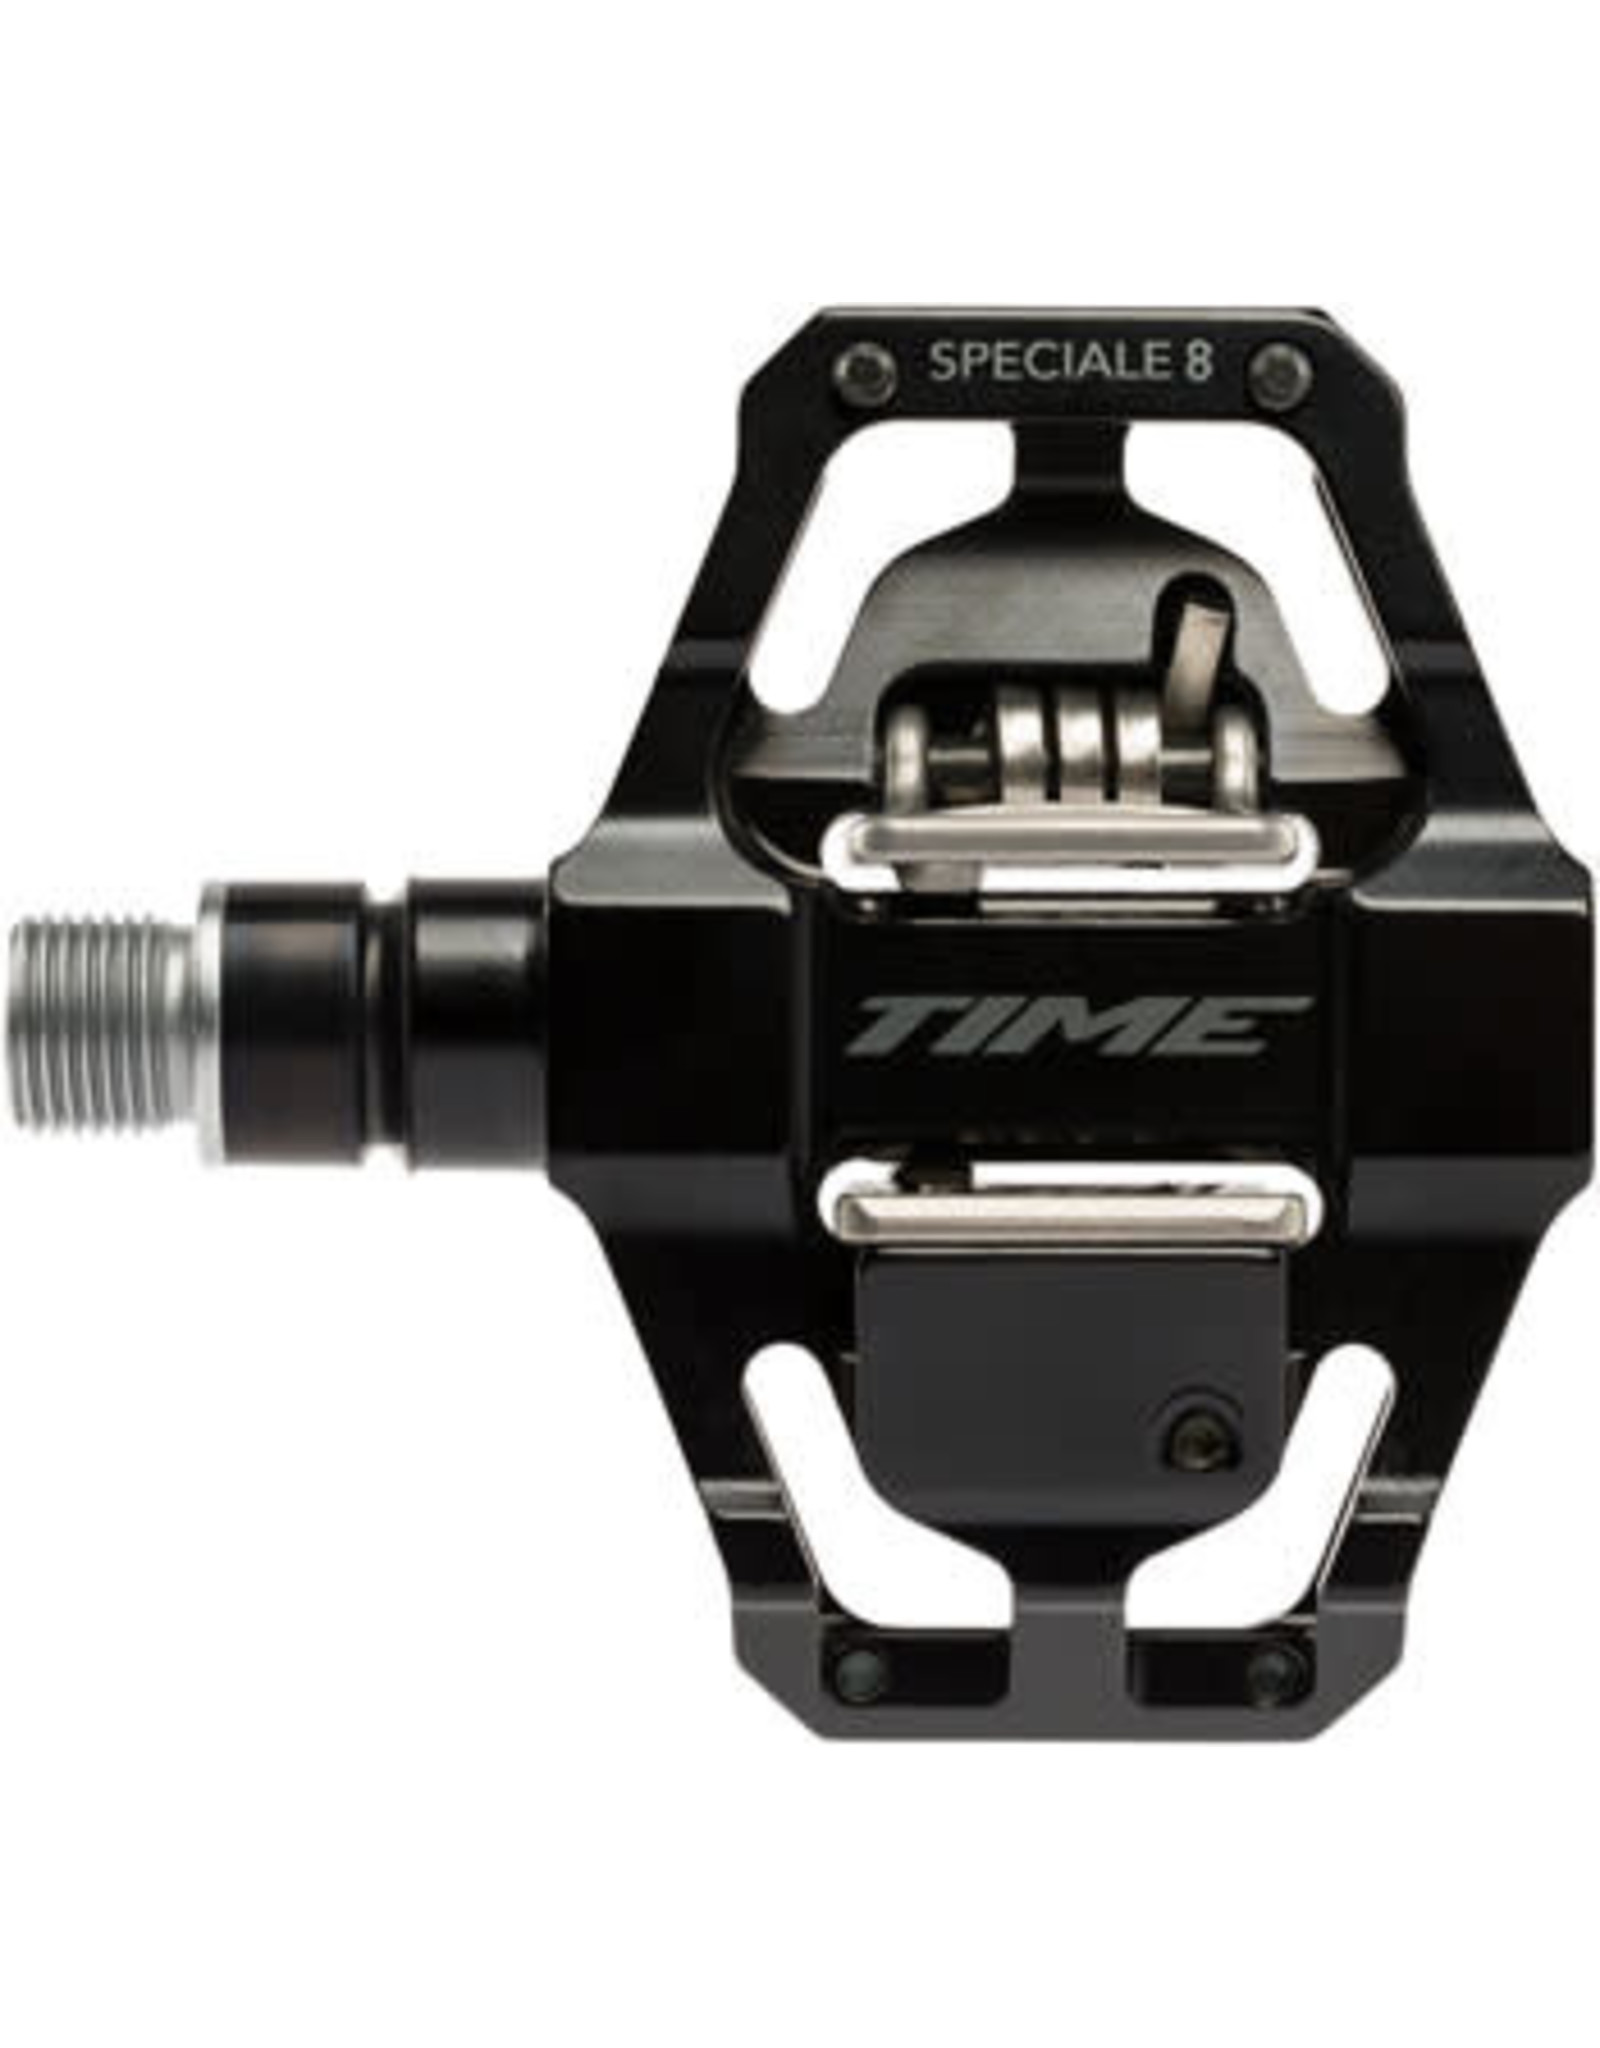 Time Time SPECIALE 8 Pedals Dual Sided Clipless w/ Platform Aluminum 9/16"